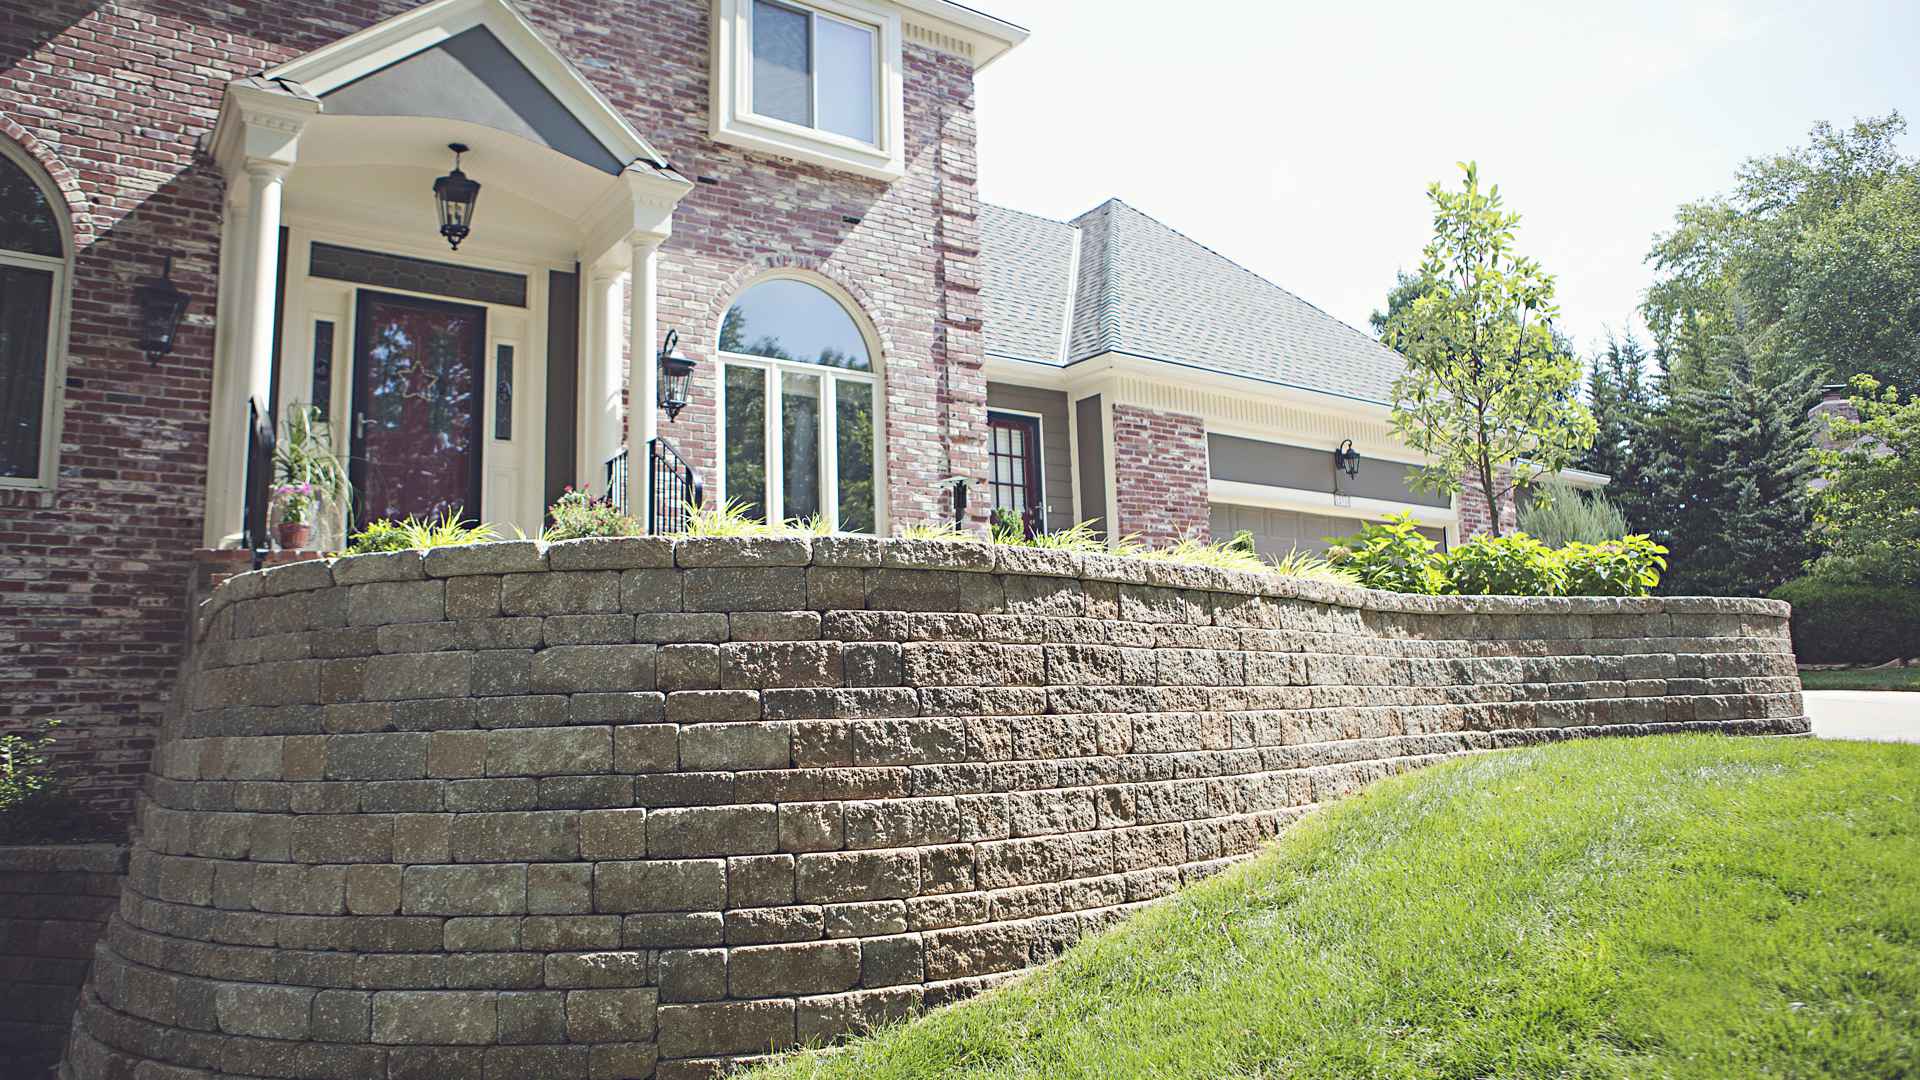 Retaining wall at the entrance of a beautiful home.